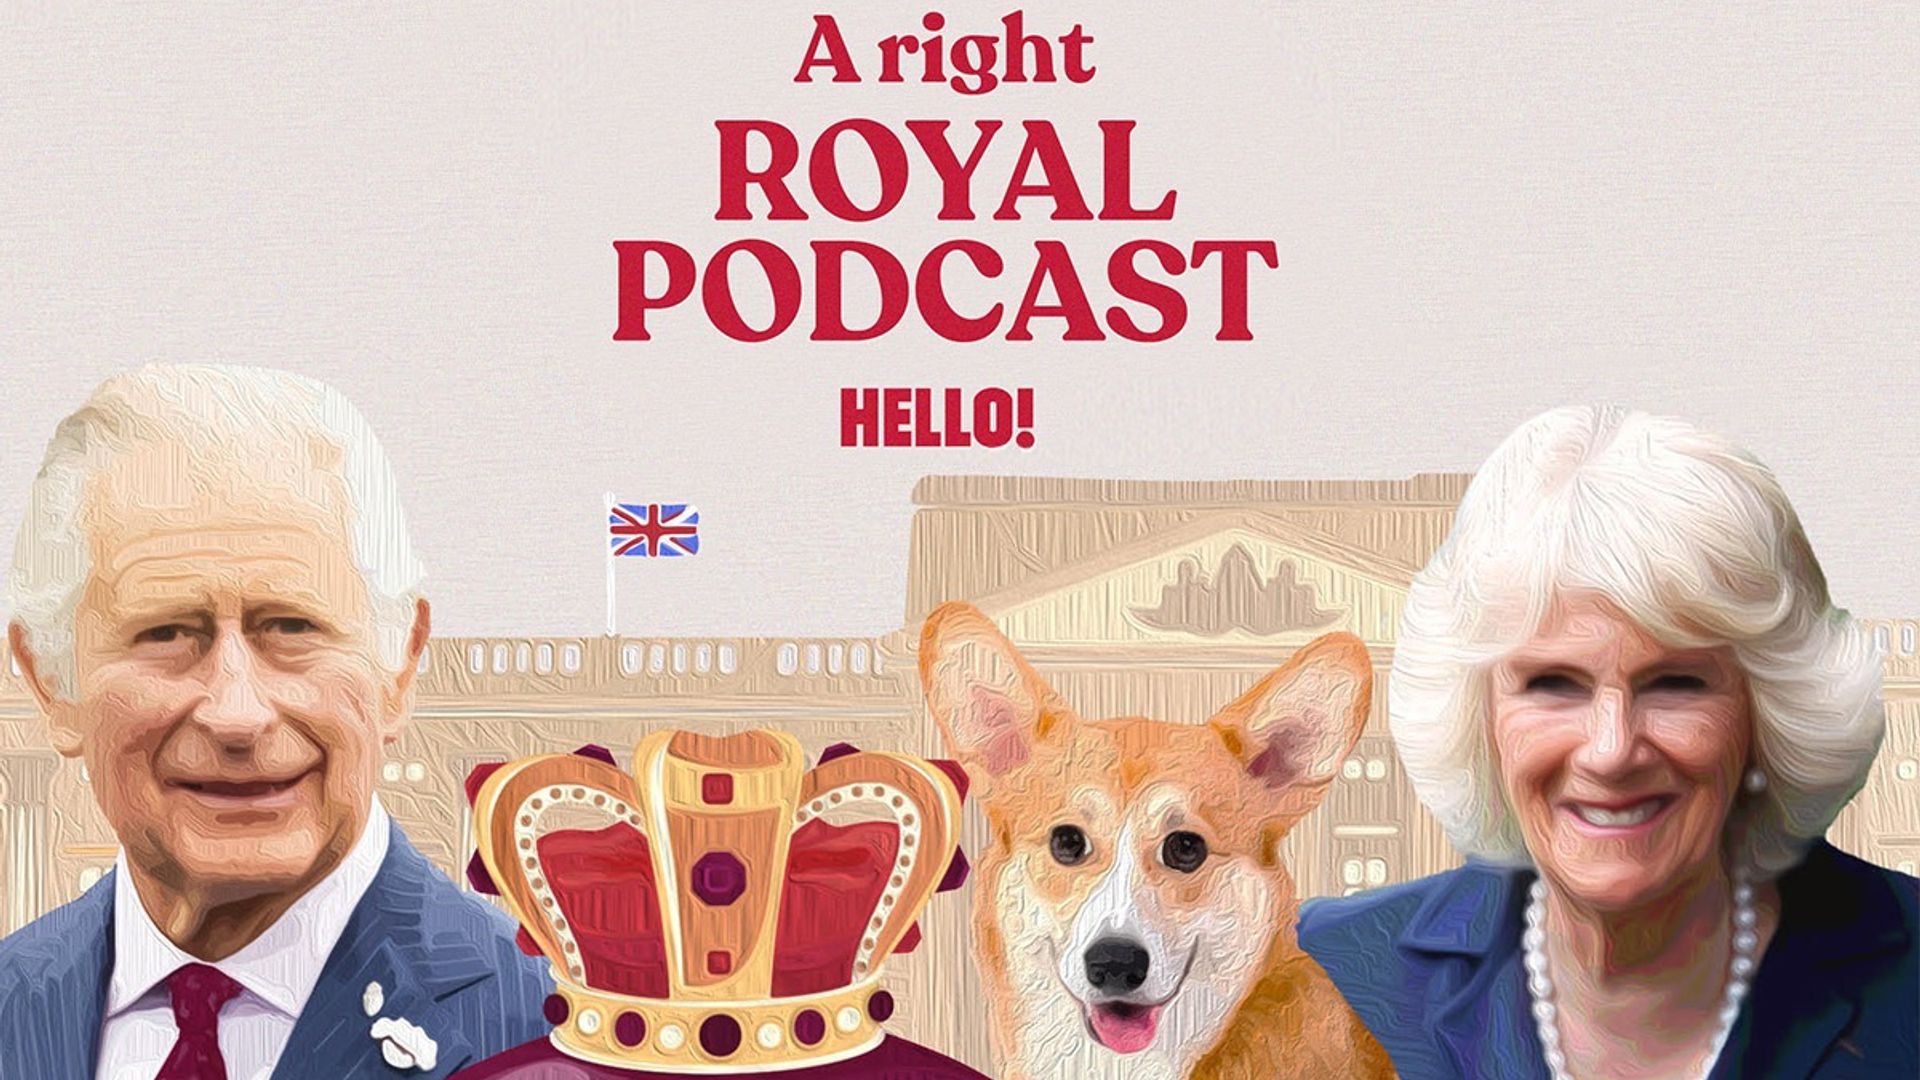 HELLO!'s Right Royal Podcast talks King Charles III - the man under the crown